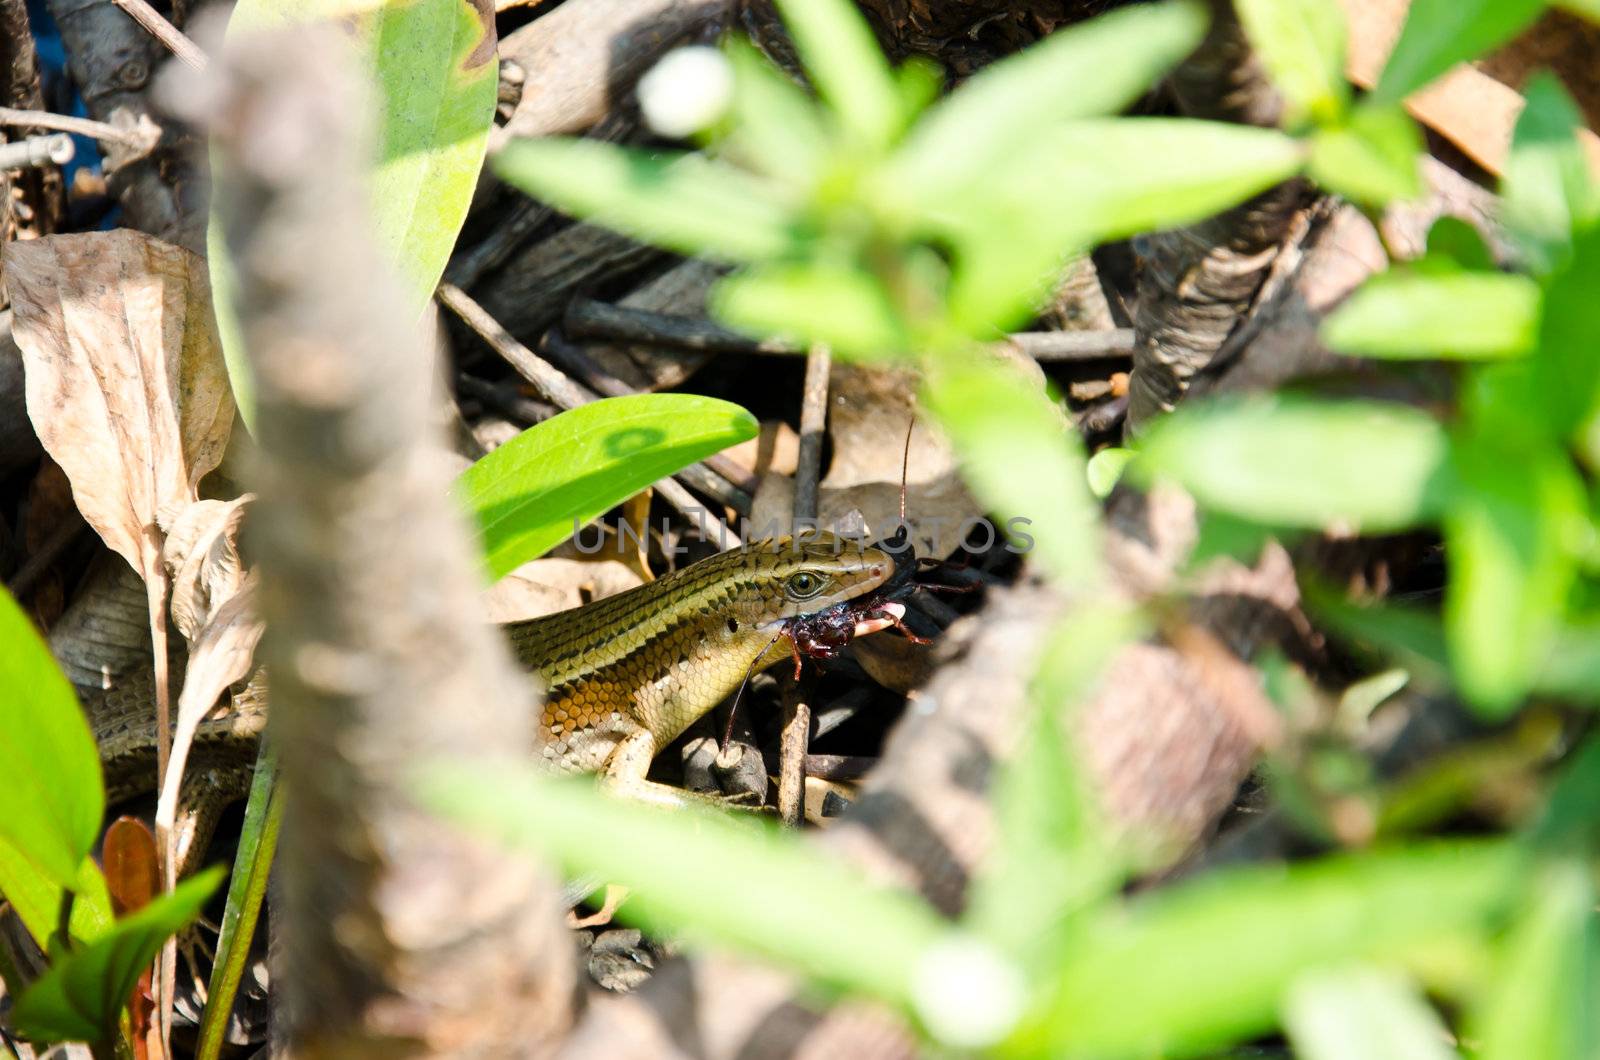 Skink (Eutropis multifasciata) is catching a insects.